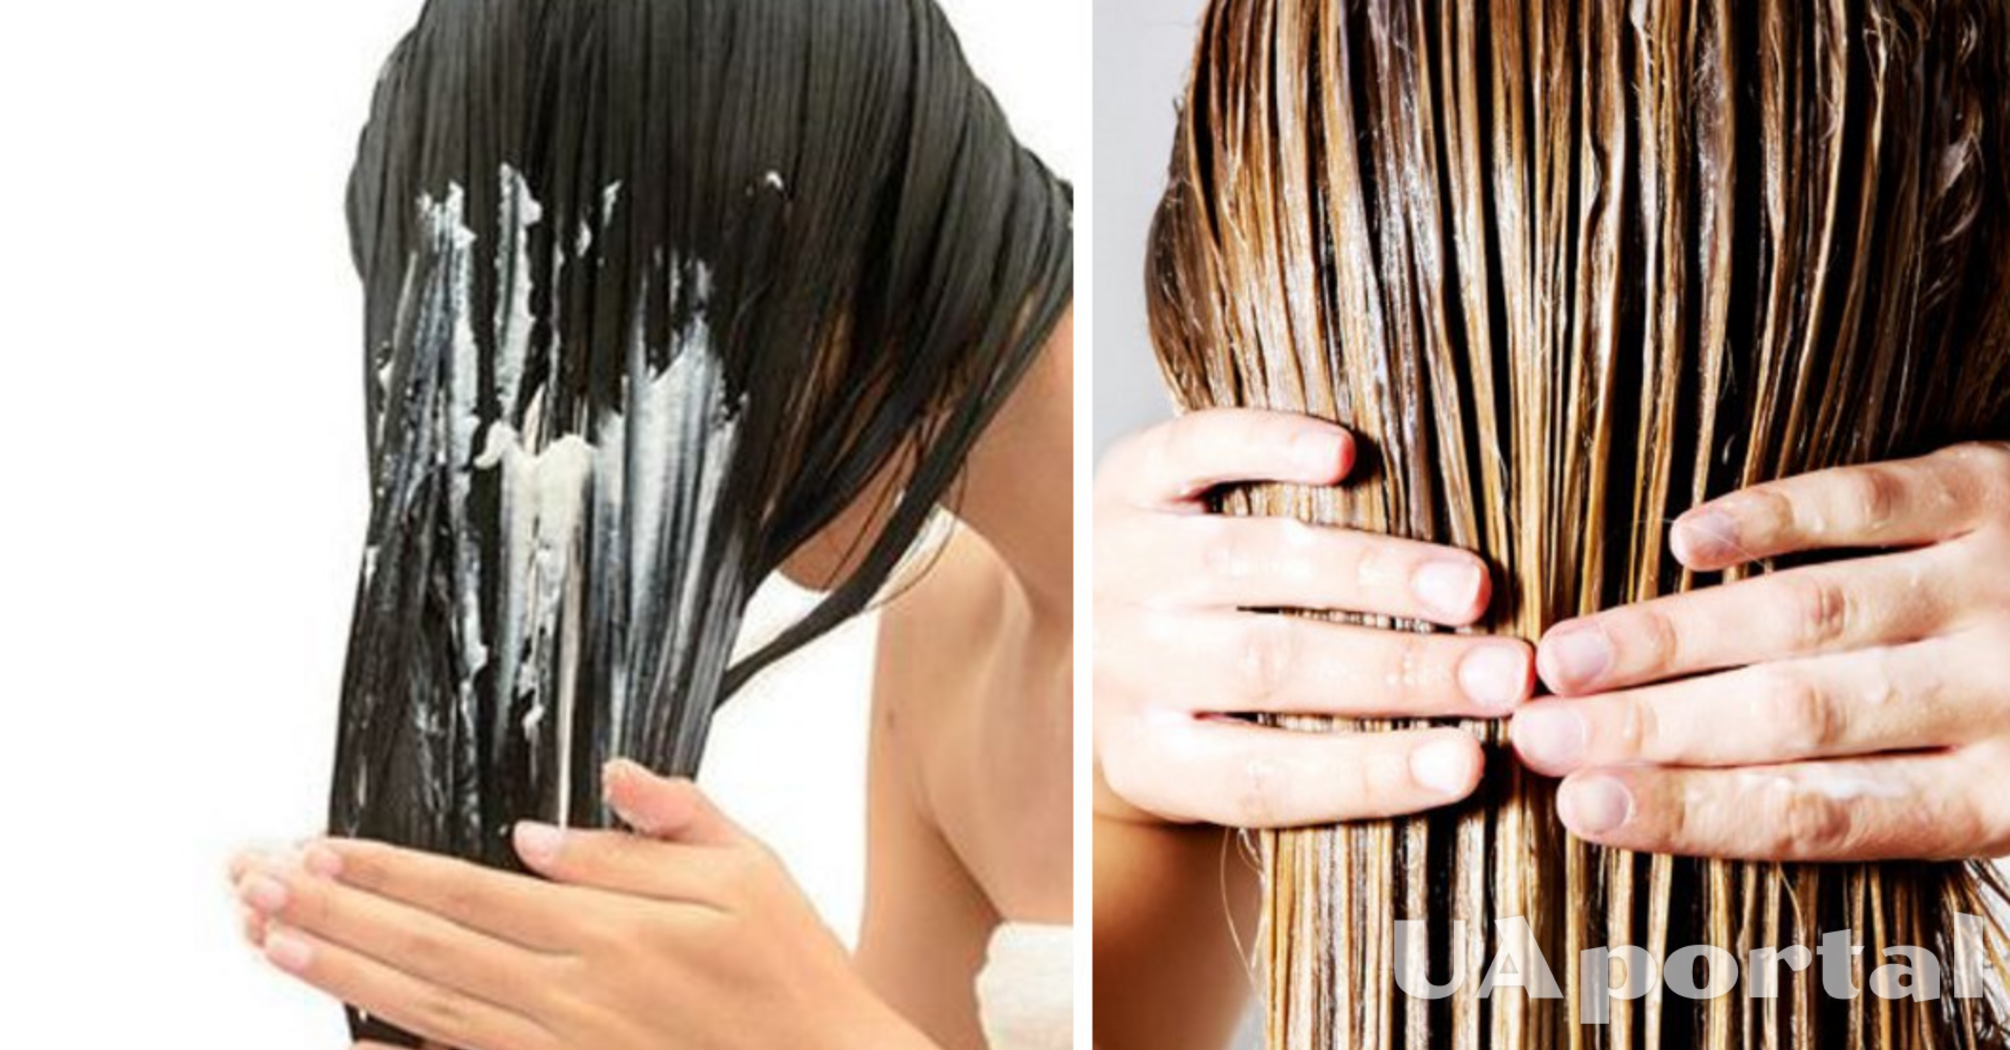 What should be added to the conditioner to make your hair look like a salon